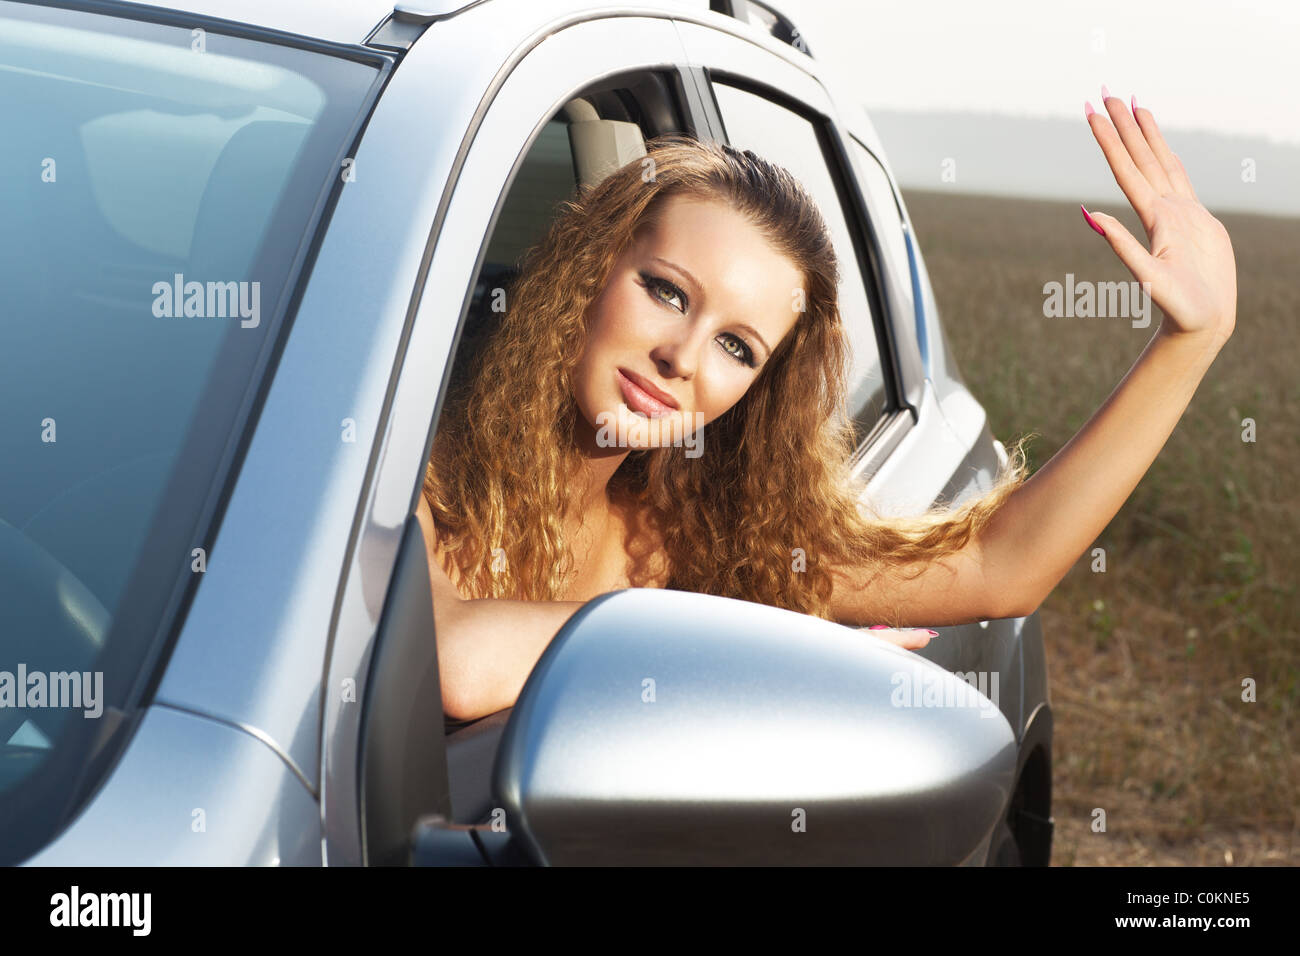 Young woman looking out of car and waving hand. Stock Photo